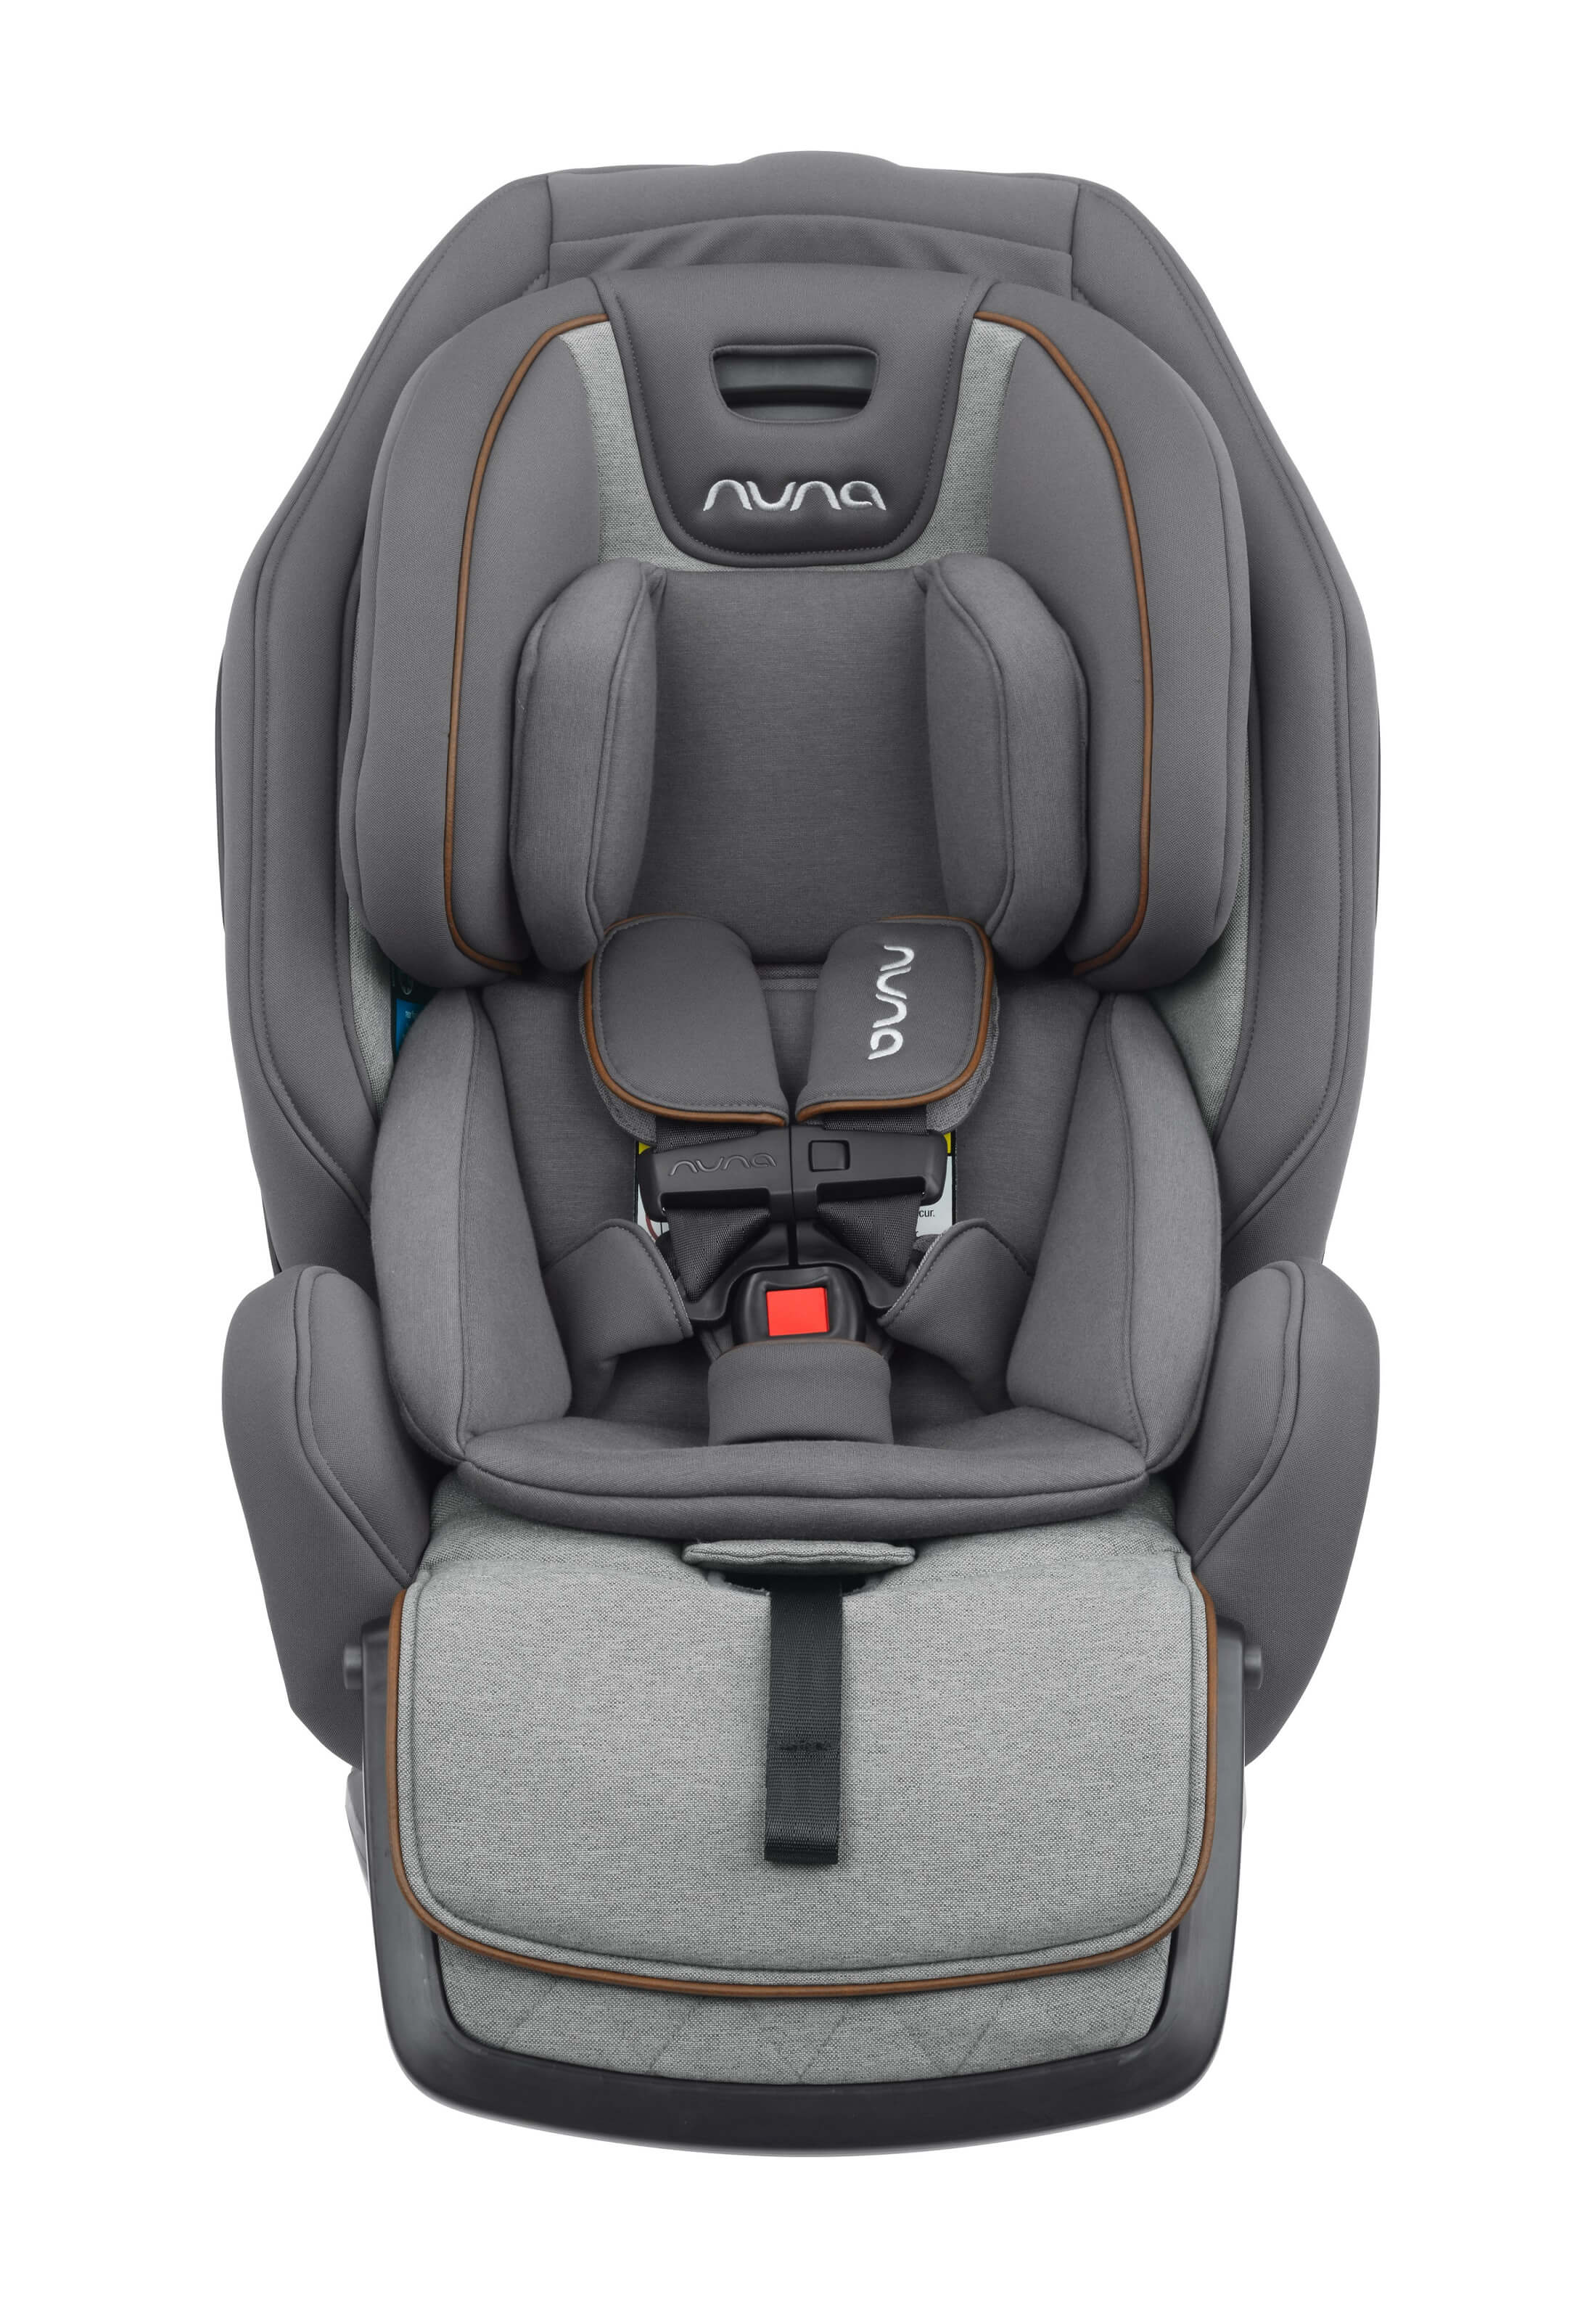 Best Infant to Older Toddler Car Seat - Nuna EXEC All-in-One